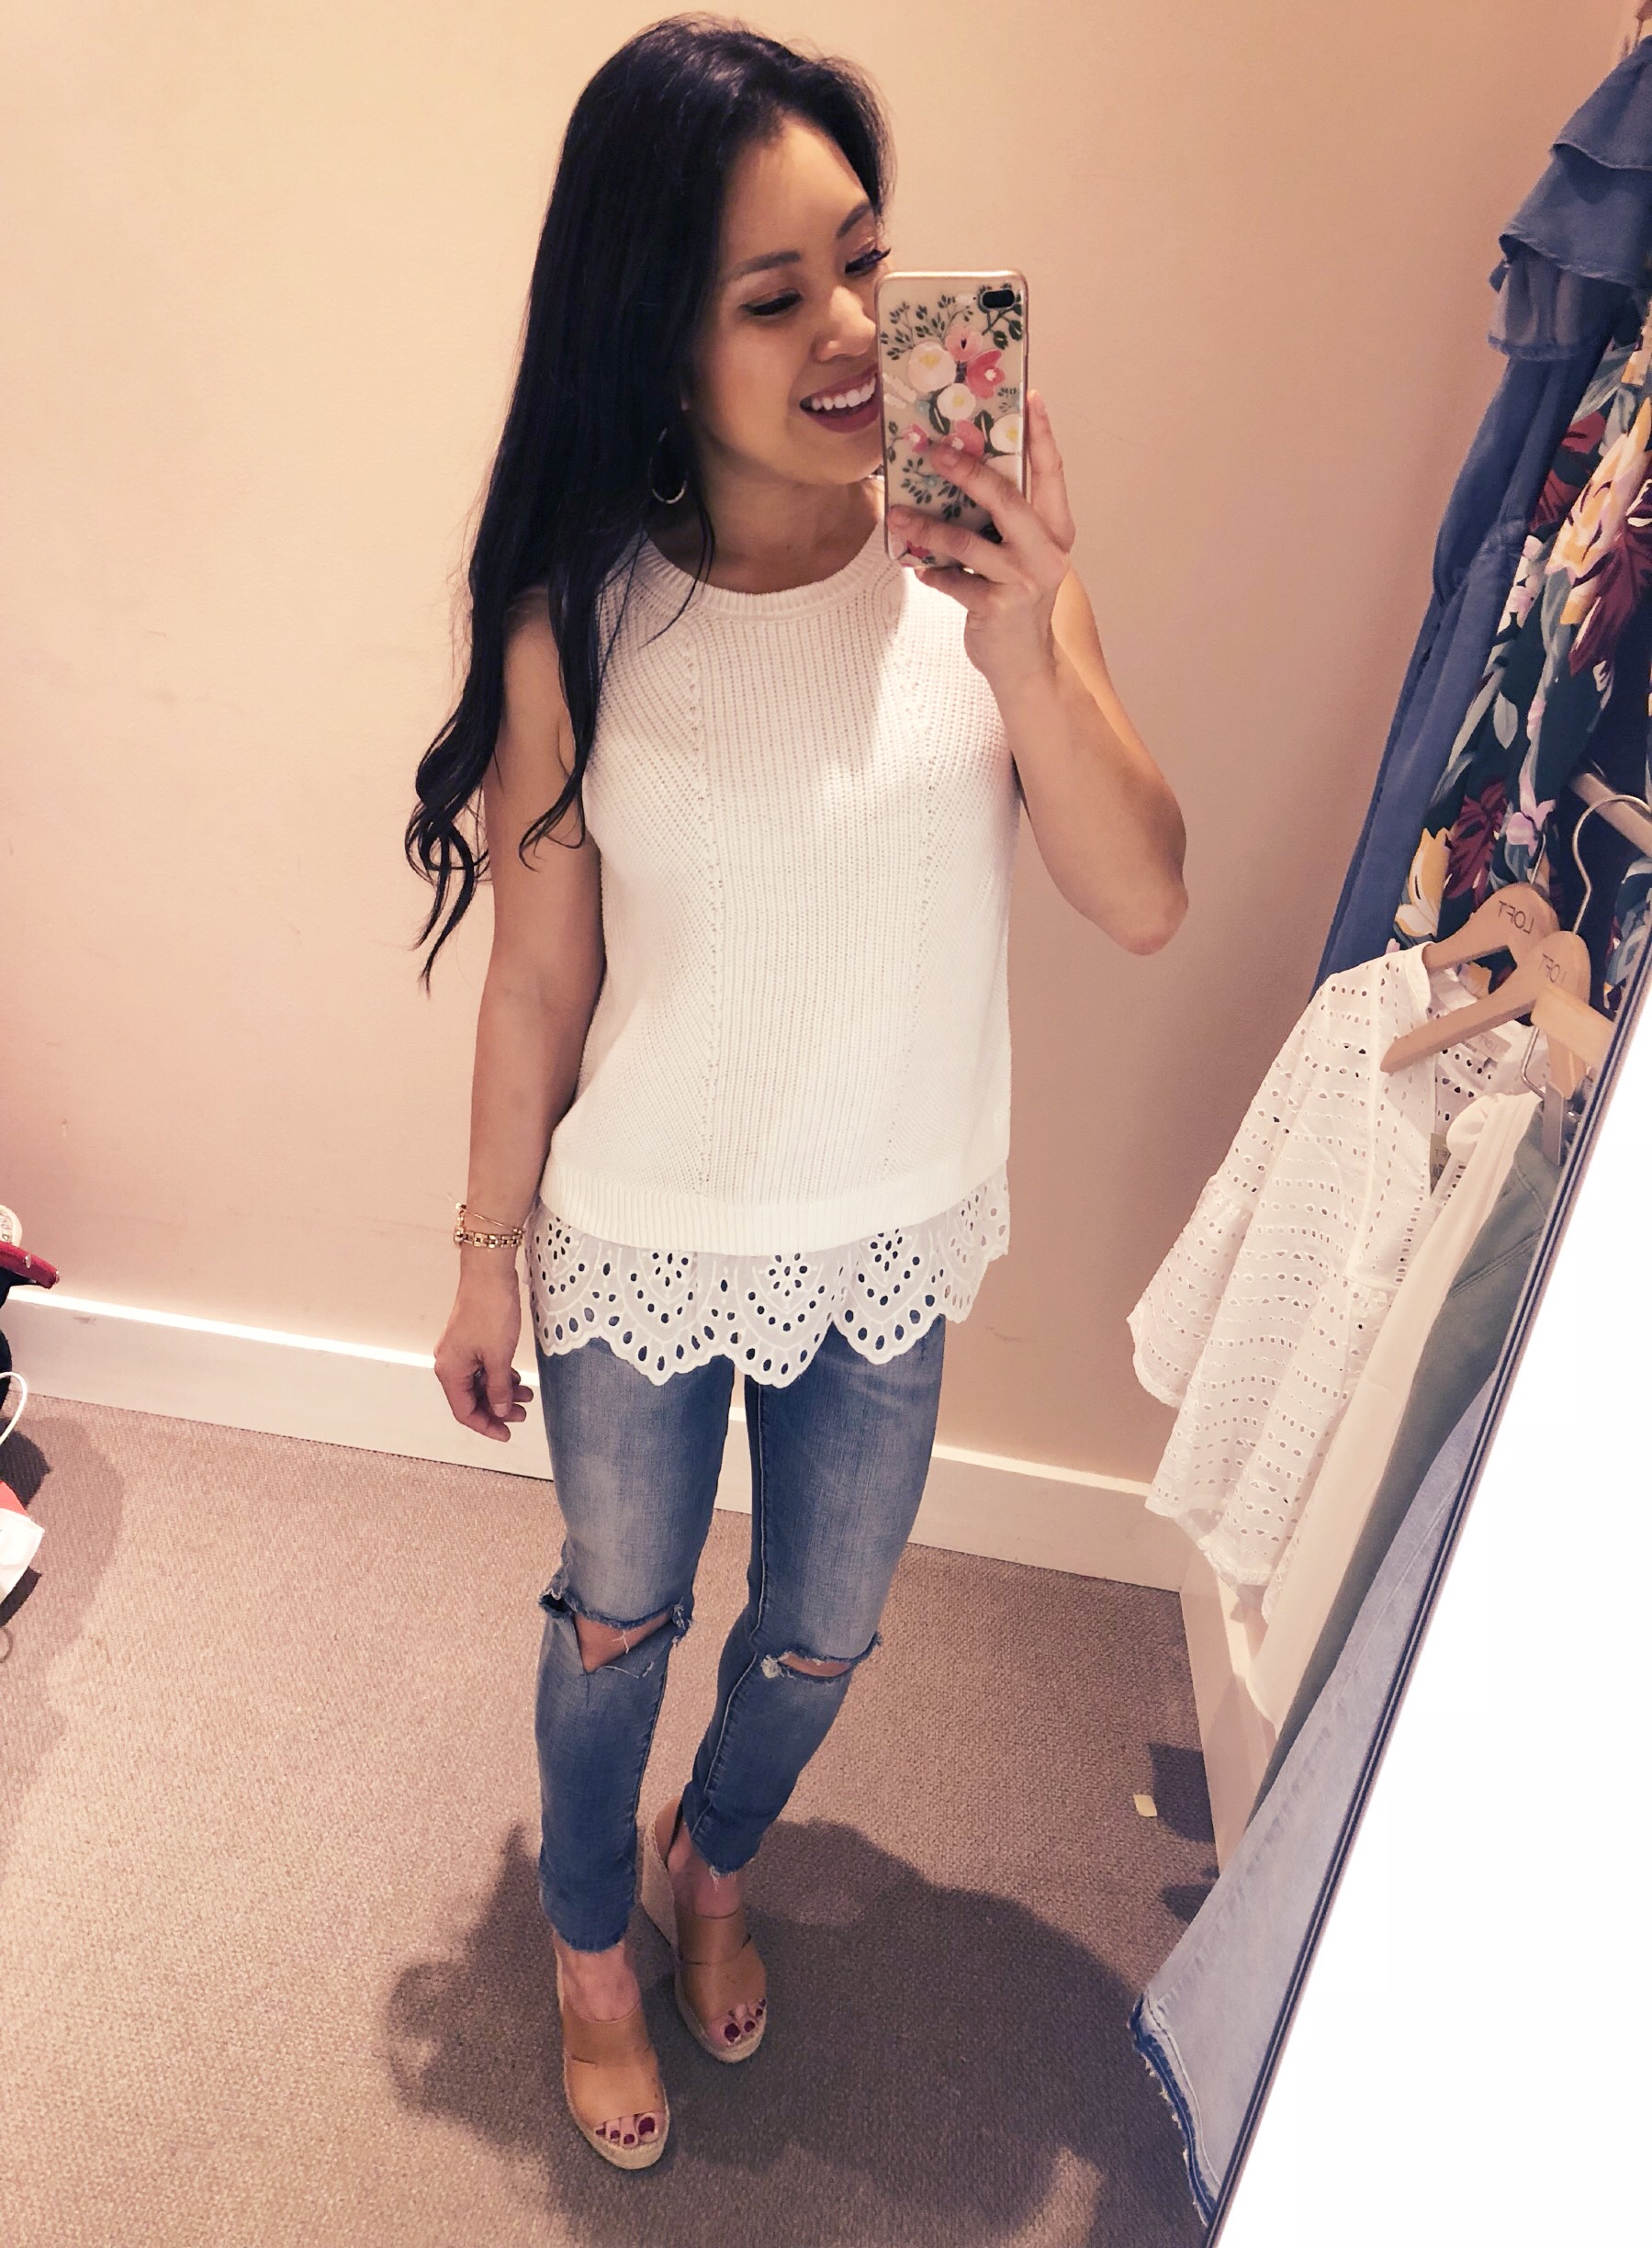 cute & little | dallas petite fashion blog | loft dressing room try on review | eyelet sweater tank, blanknyc ripped knee jeans | spring outfit - LOFT Dressing Room Try-On by popular Dallas petite fashion blogger, cute & little